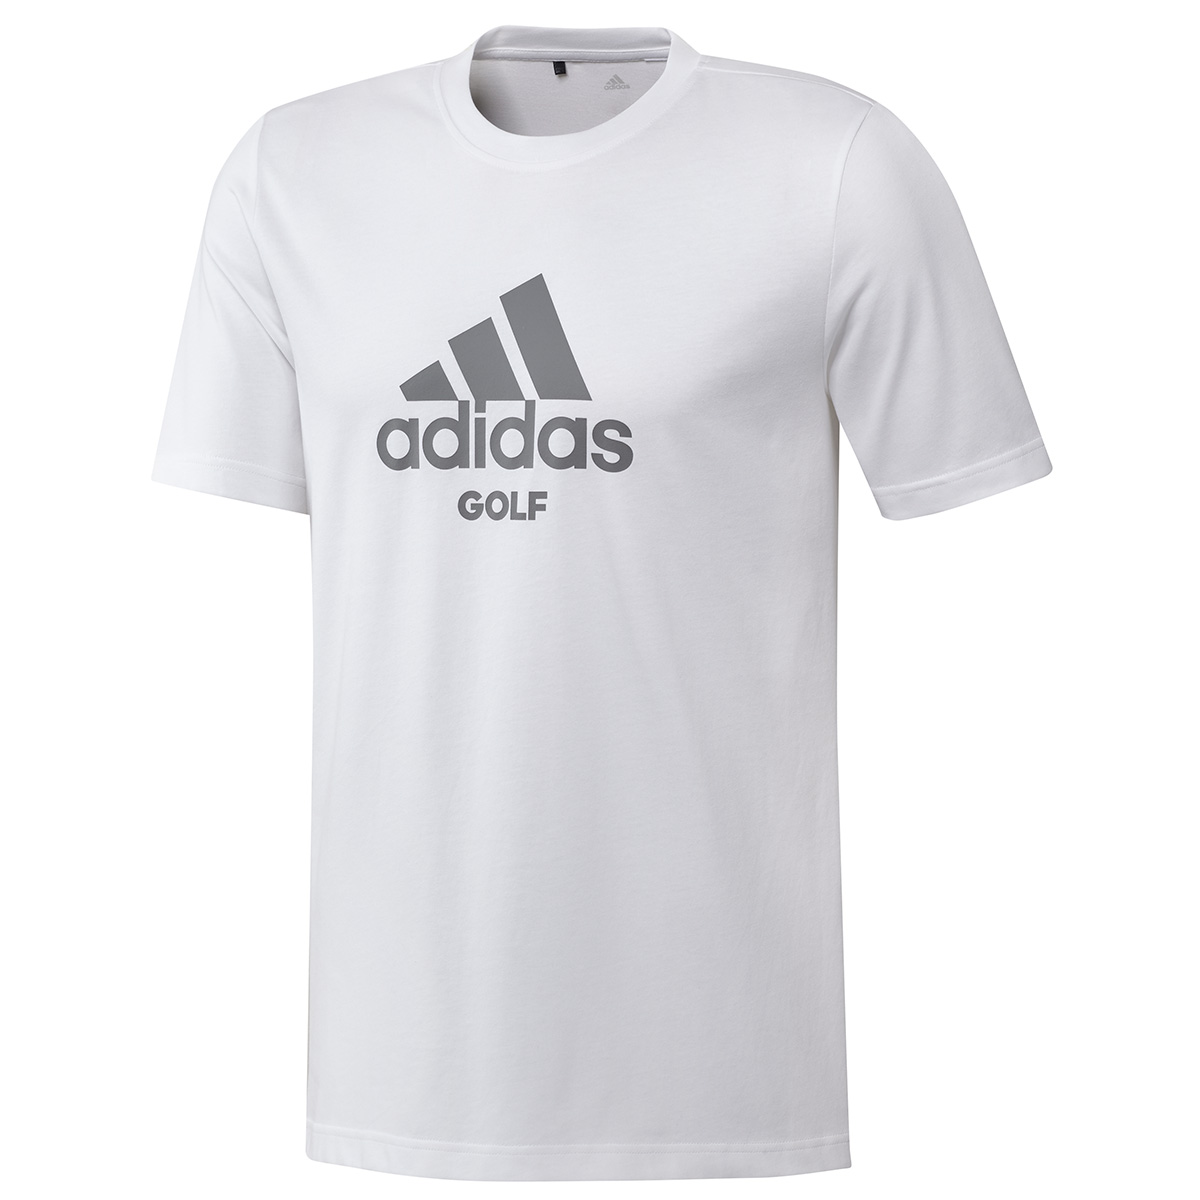 adidas Men's T-Shirt from american